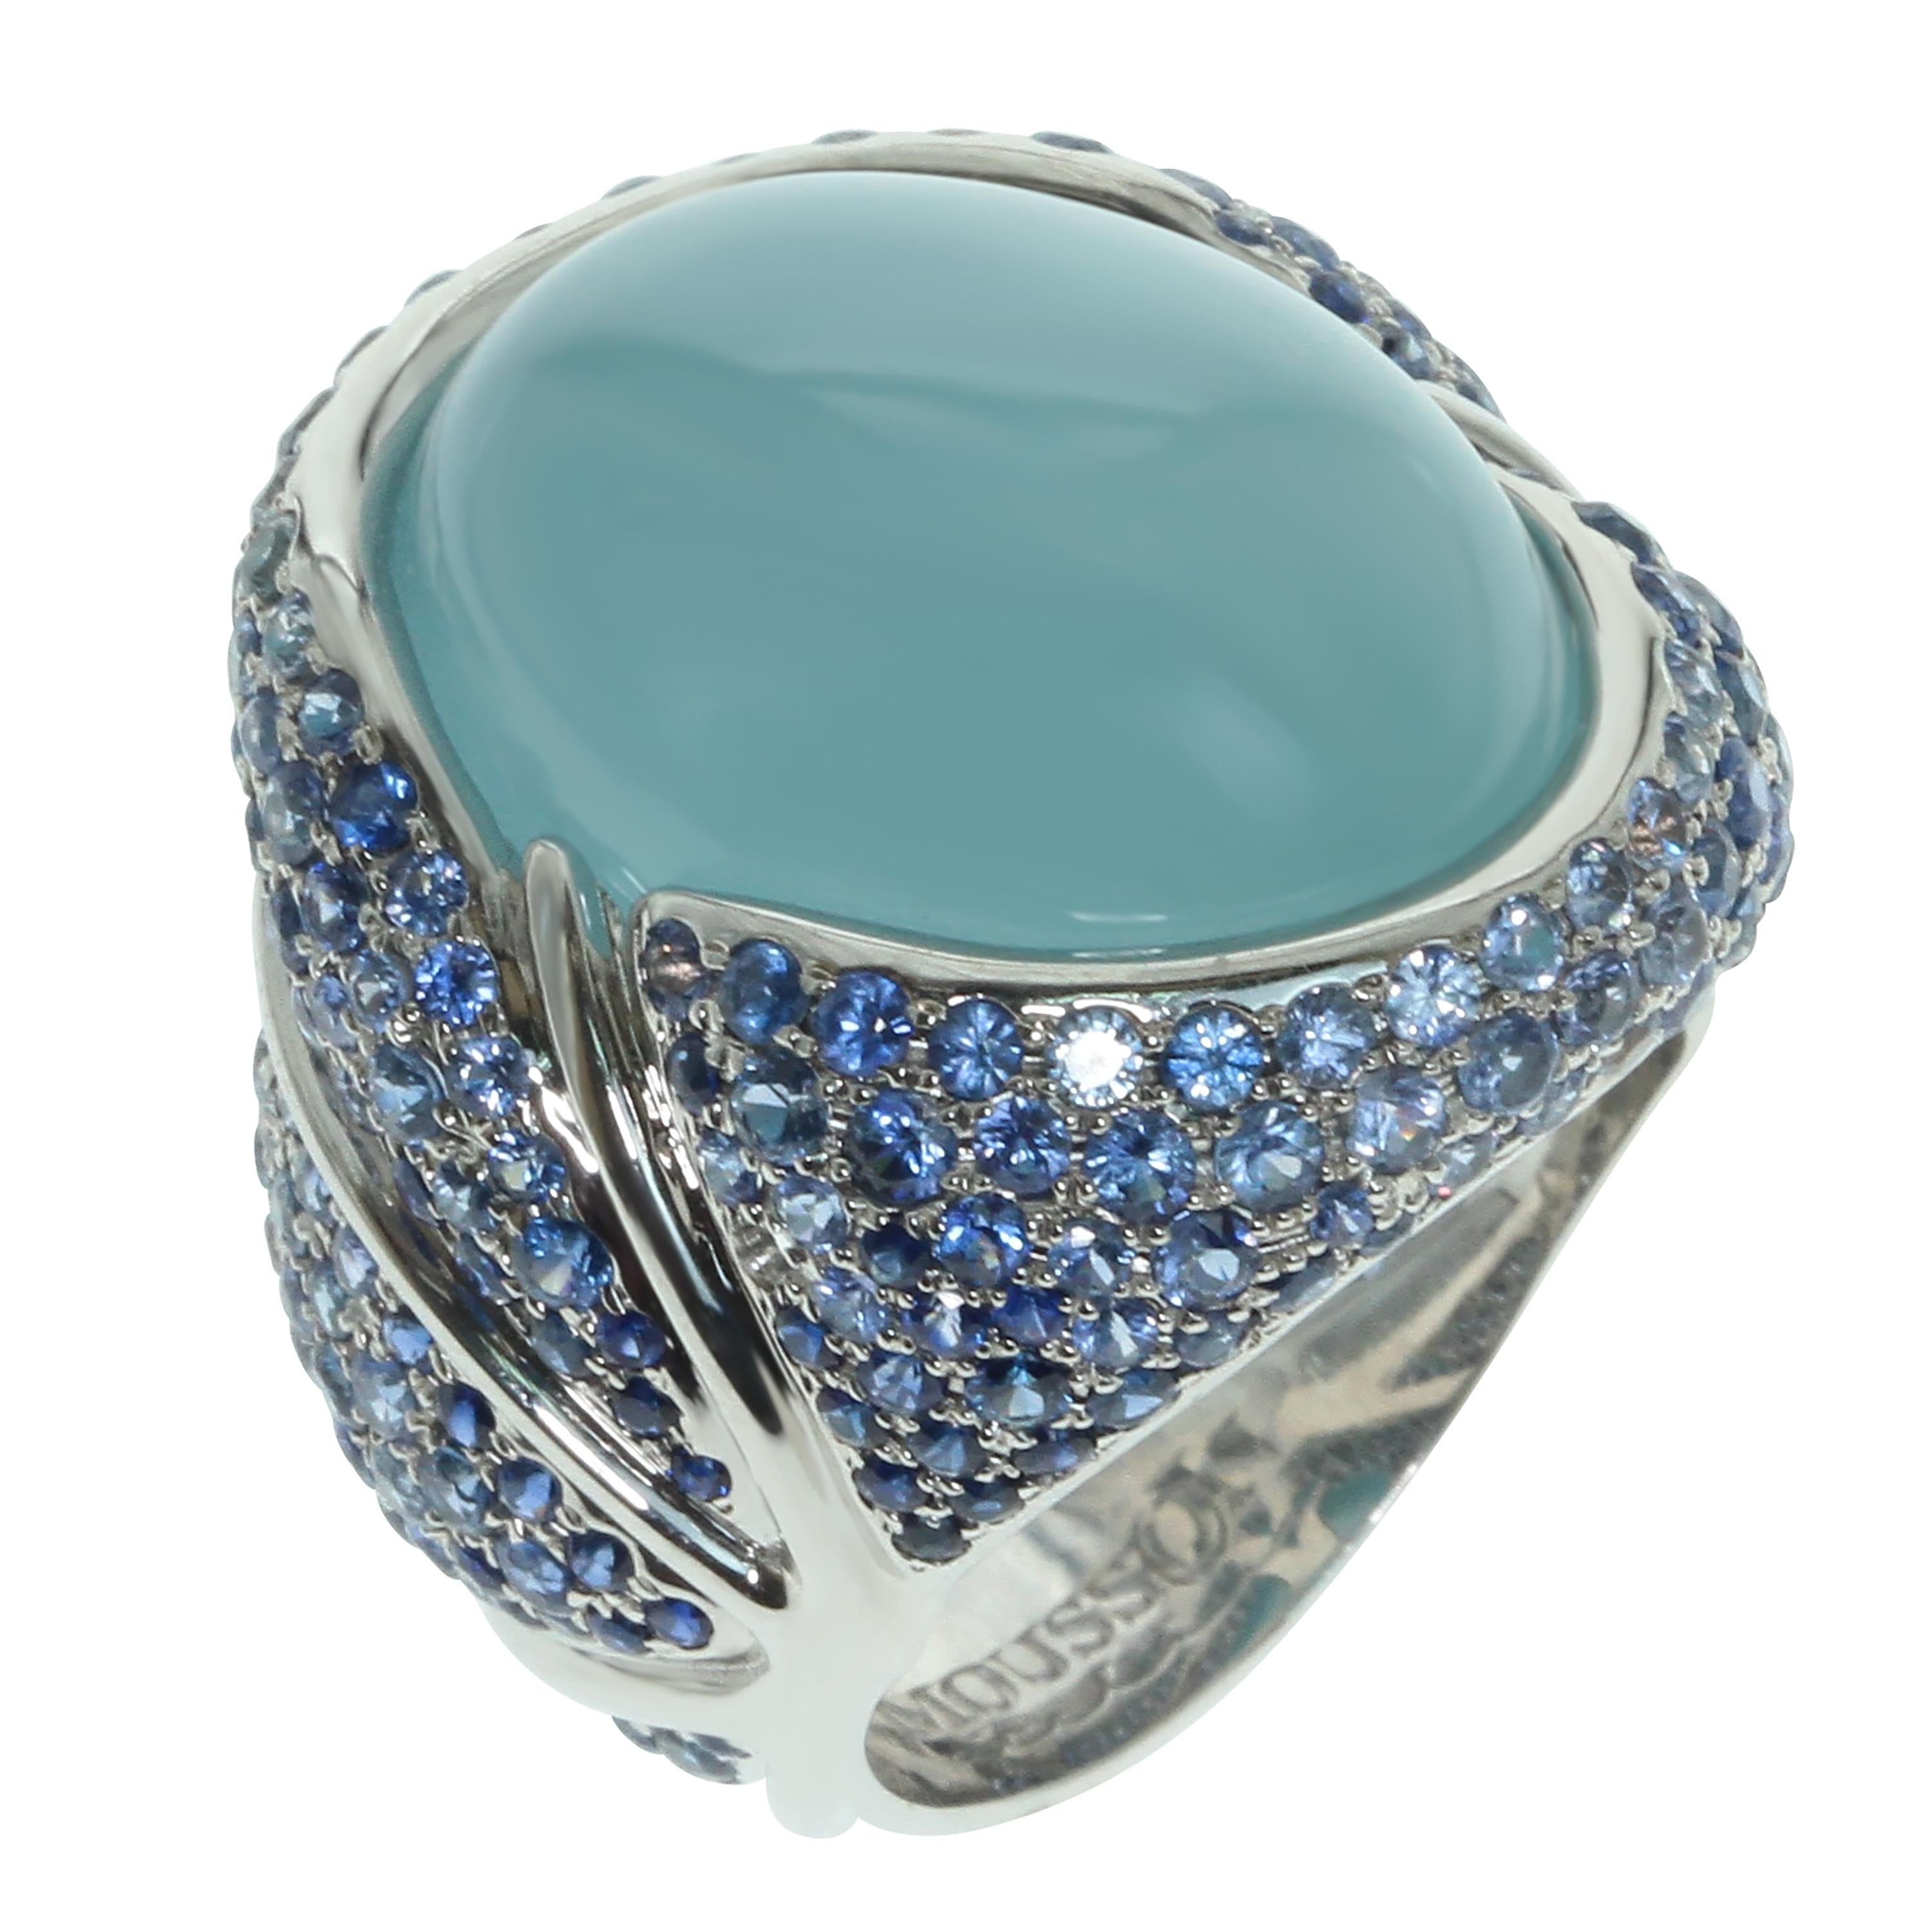 Milky Aquamarine Cabochon 20.60 Carat Sapphire 18 Karat White Gold Ring
What comes to your mind when you hear the words 